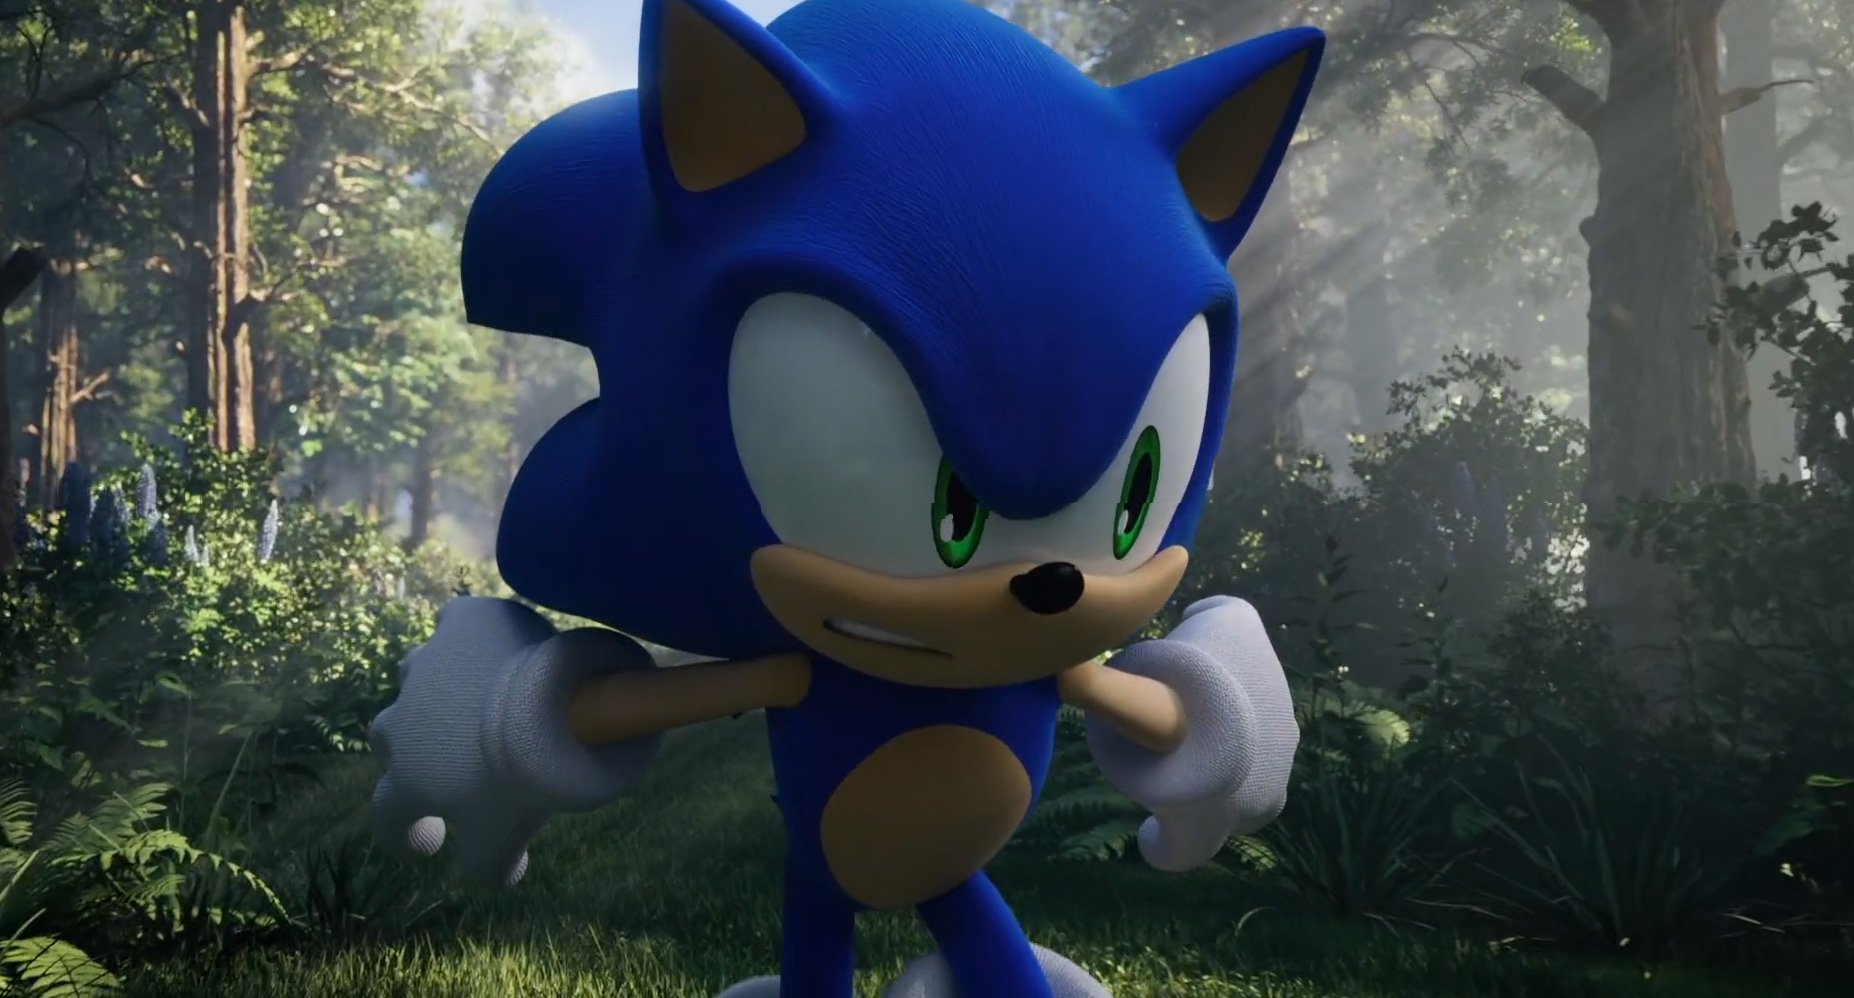 Sonic Frontiers & Sonic Movie 2 Trailer CONFIRMED Today